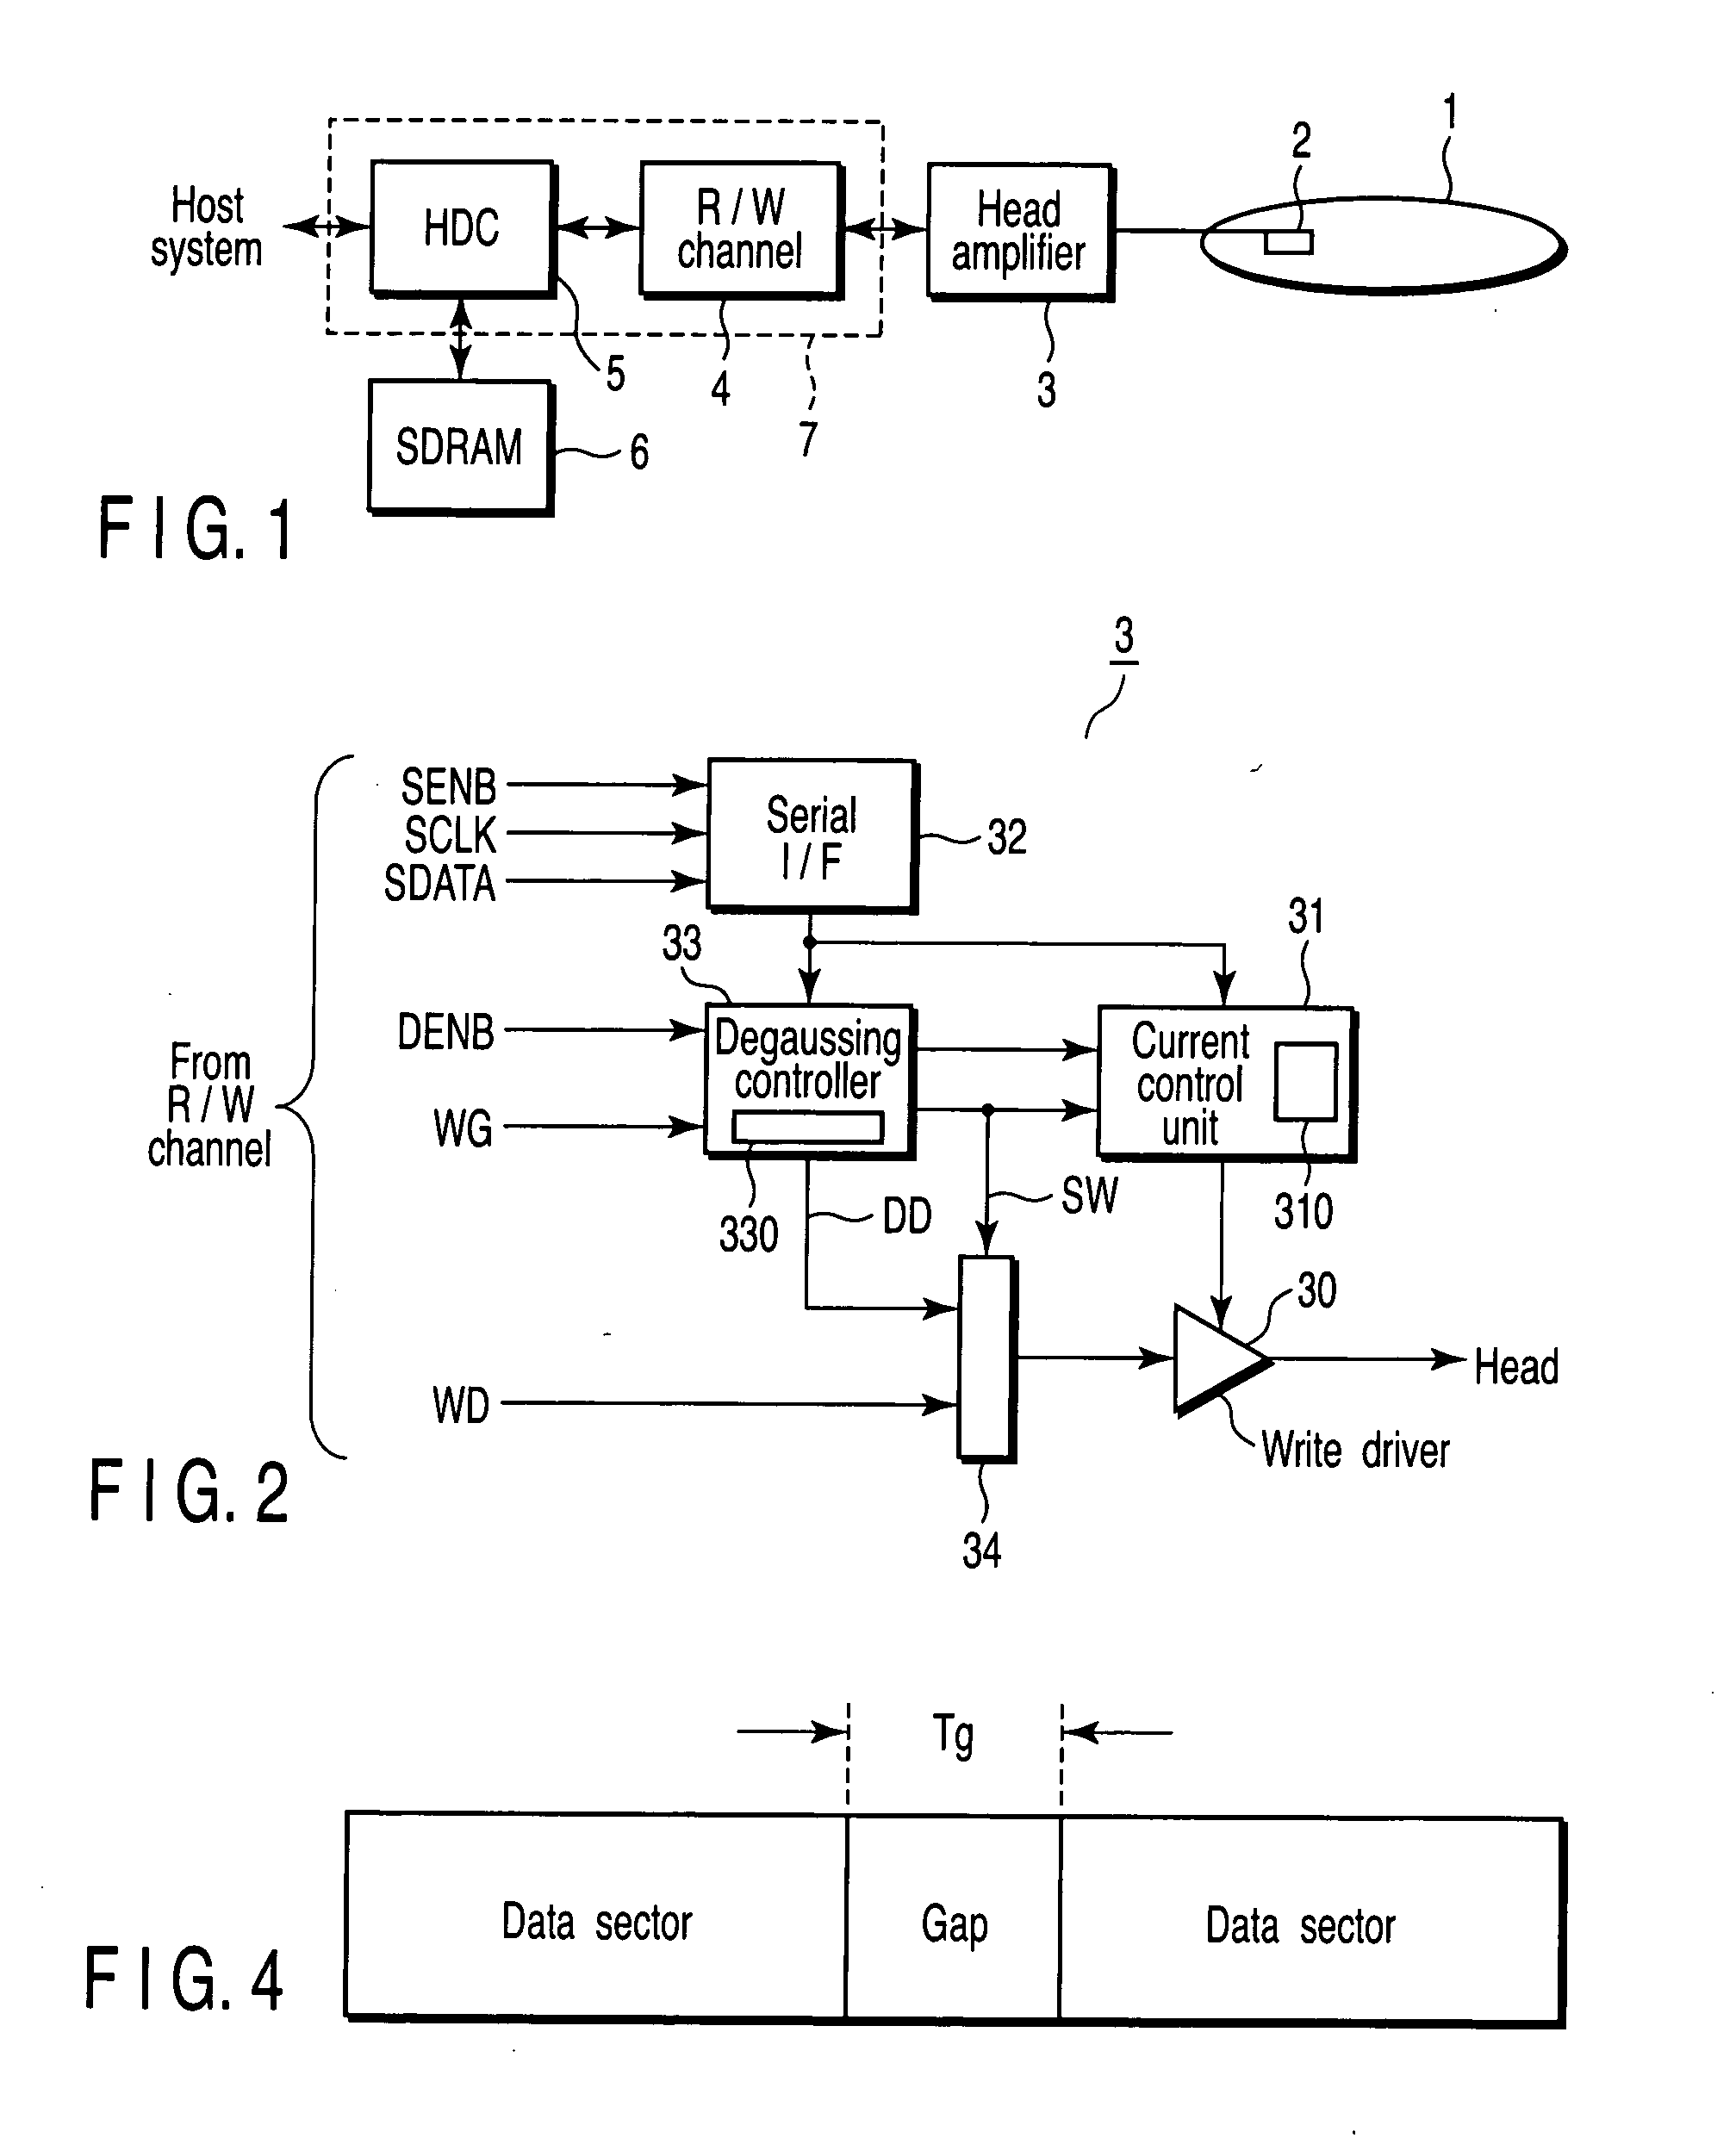 Method and apparatus for degaussing write head in a disk drive